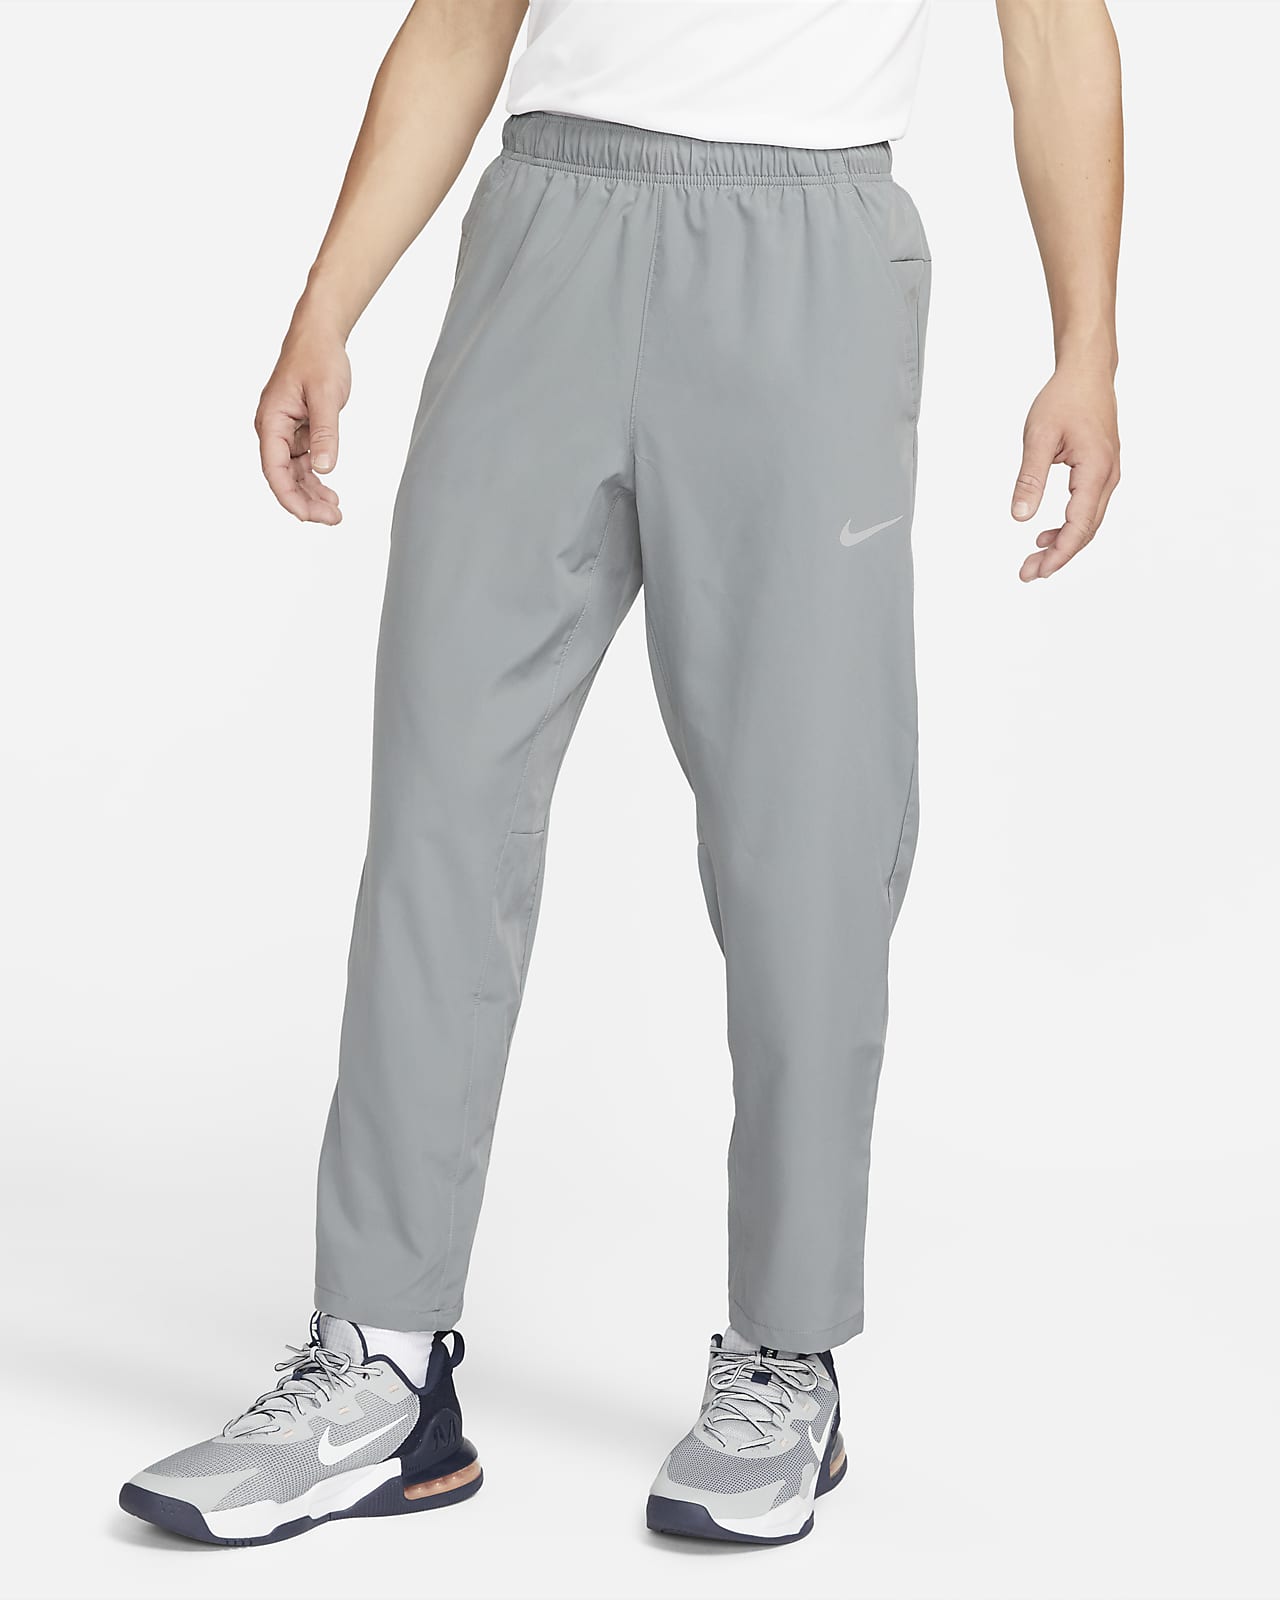 Grey Training & Gym Trousers. Nike IN